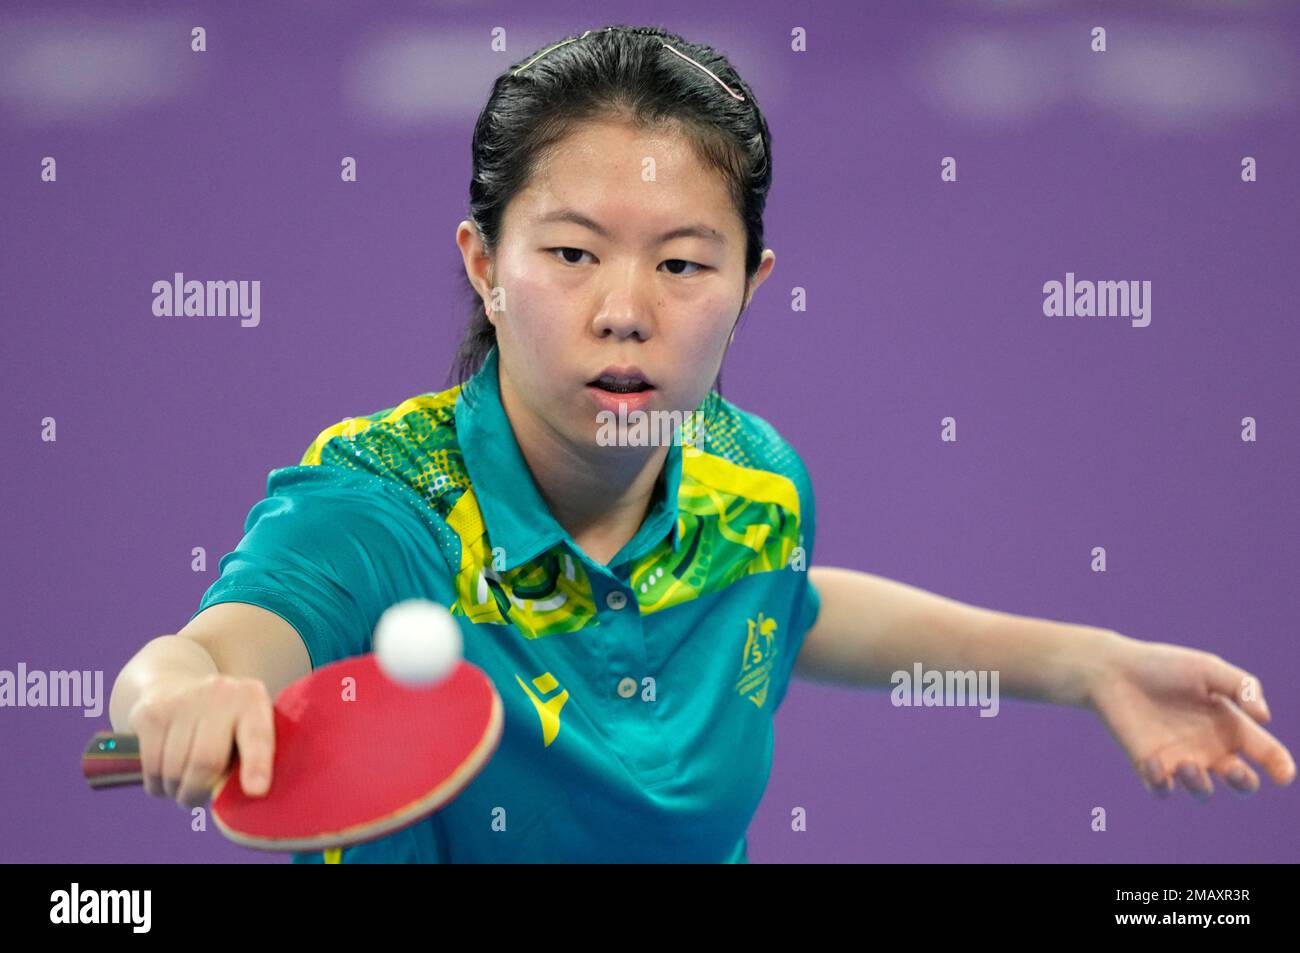 Australias Yangzi Liu competes during the womens bronze medal table tennis match against Indias Sreeja Akula at the Commonwealth Games in Birmingham, England, Sunday, Aug